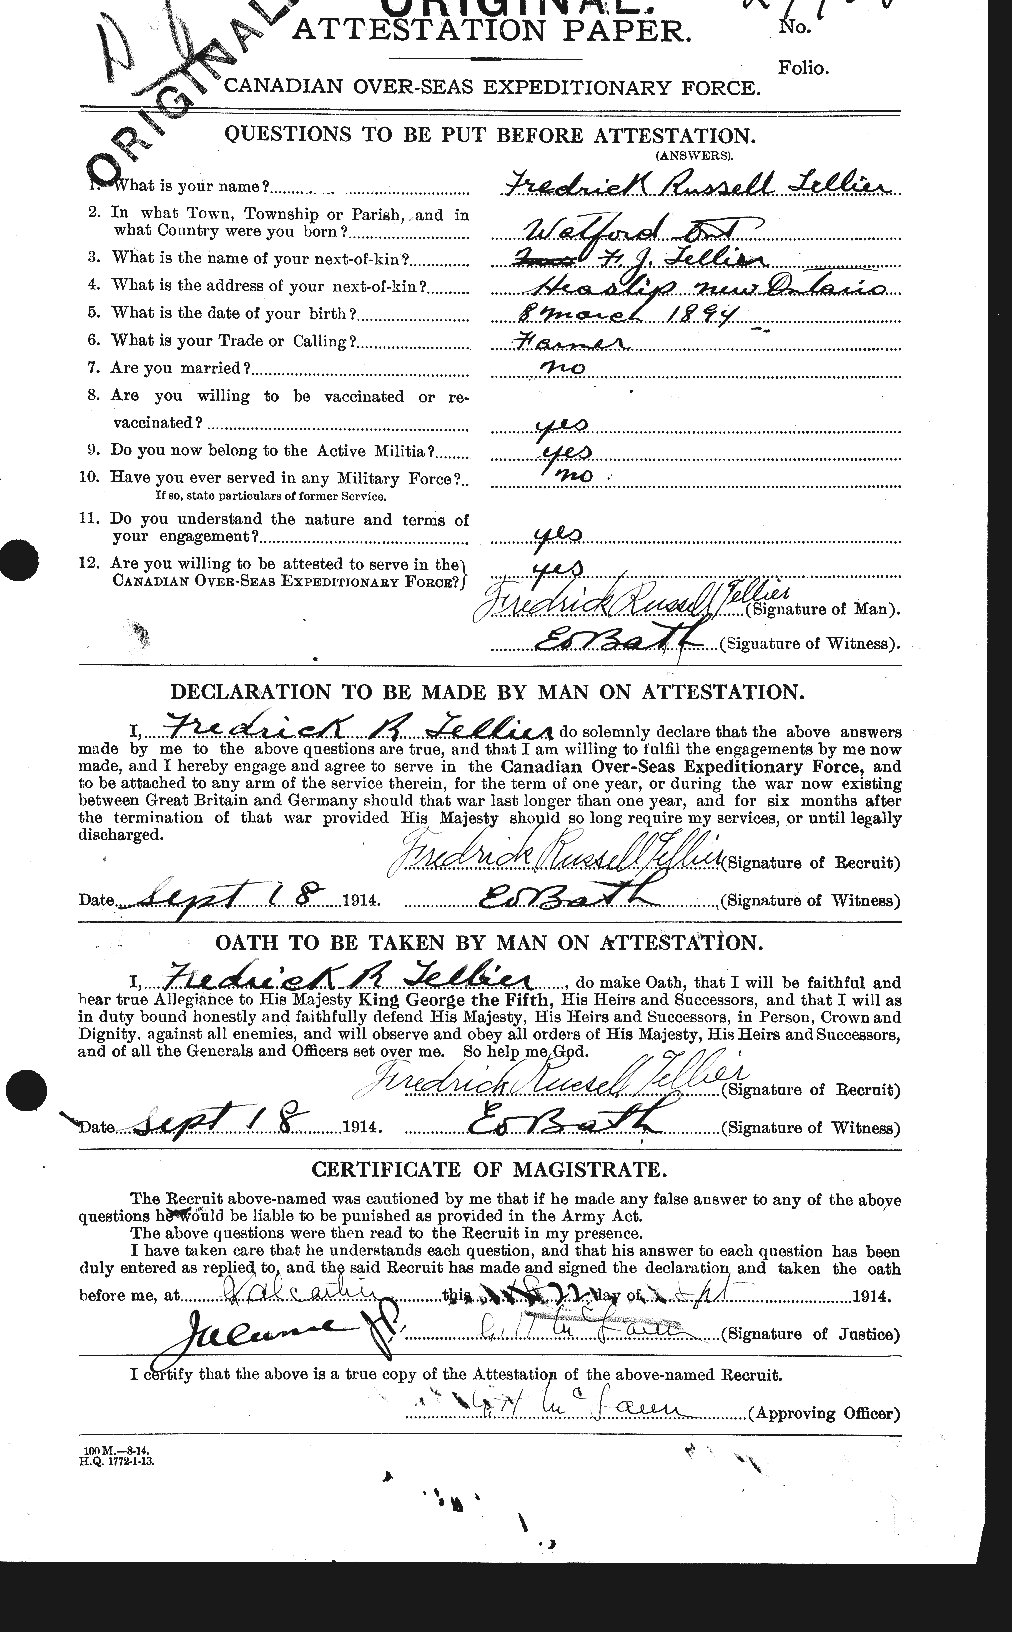 Personnel Records of the First World War - CEF 628976a